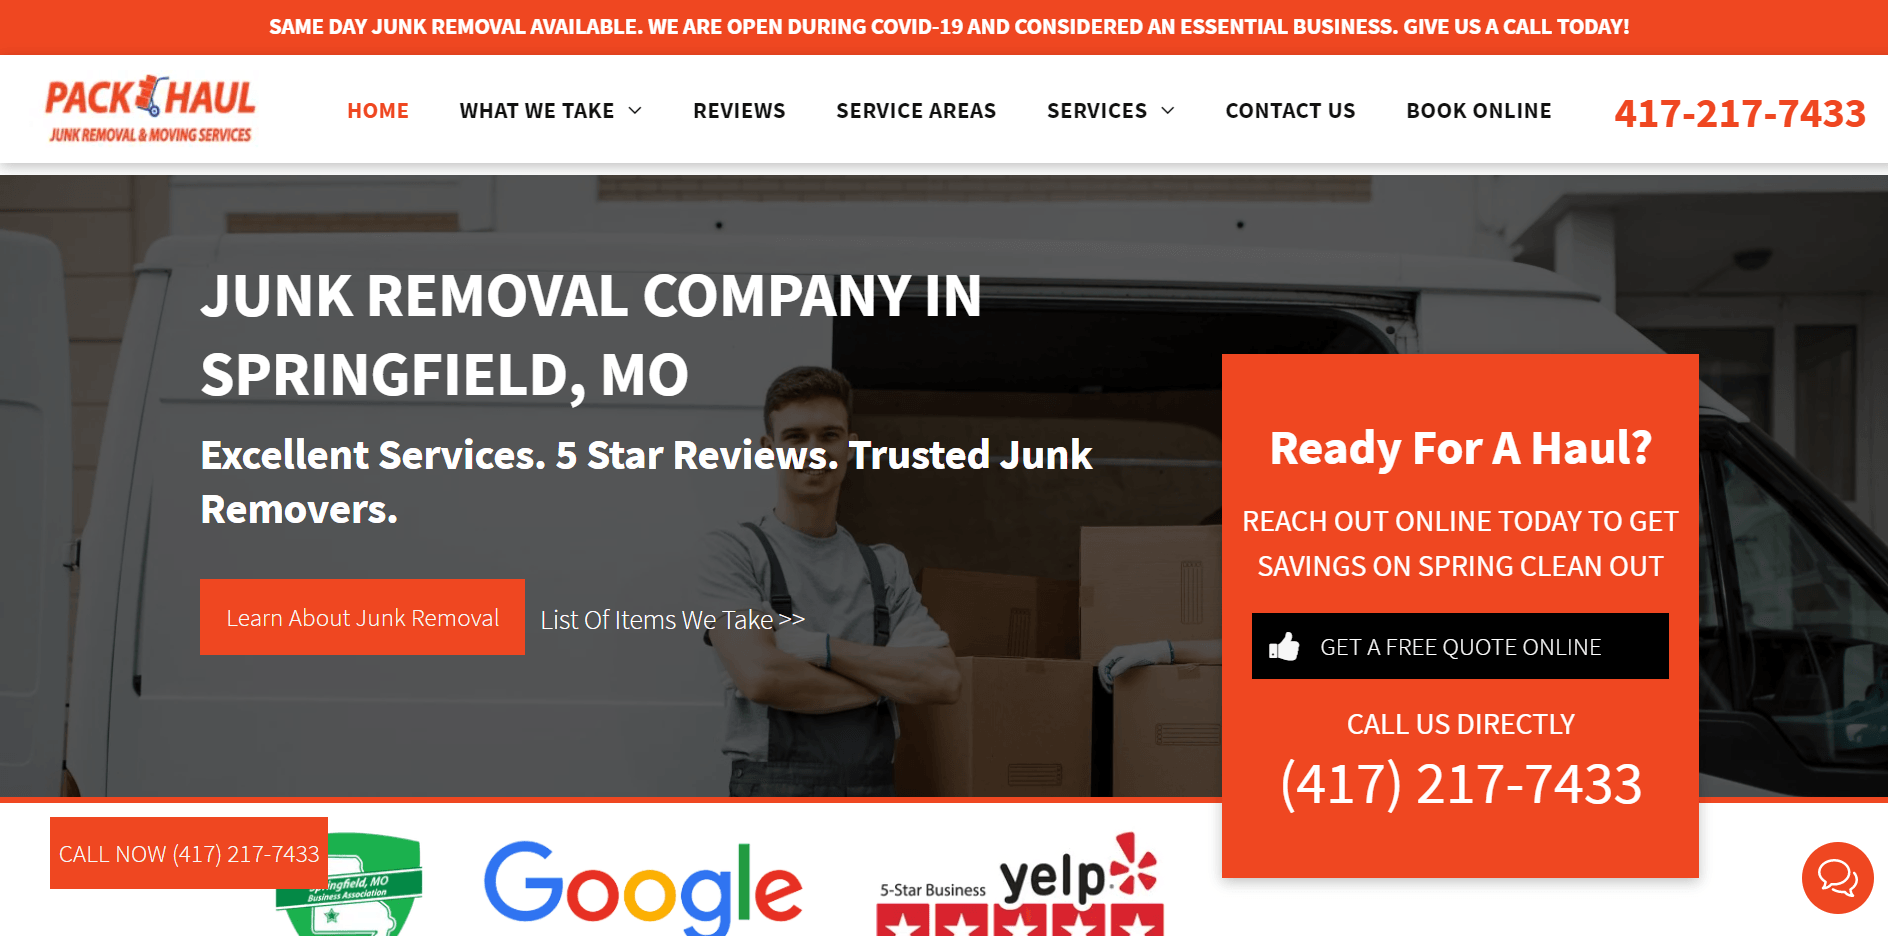 junk removal web design example